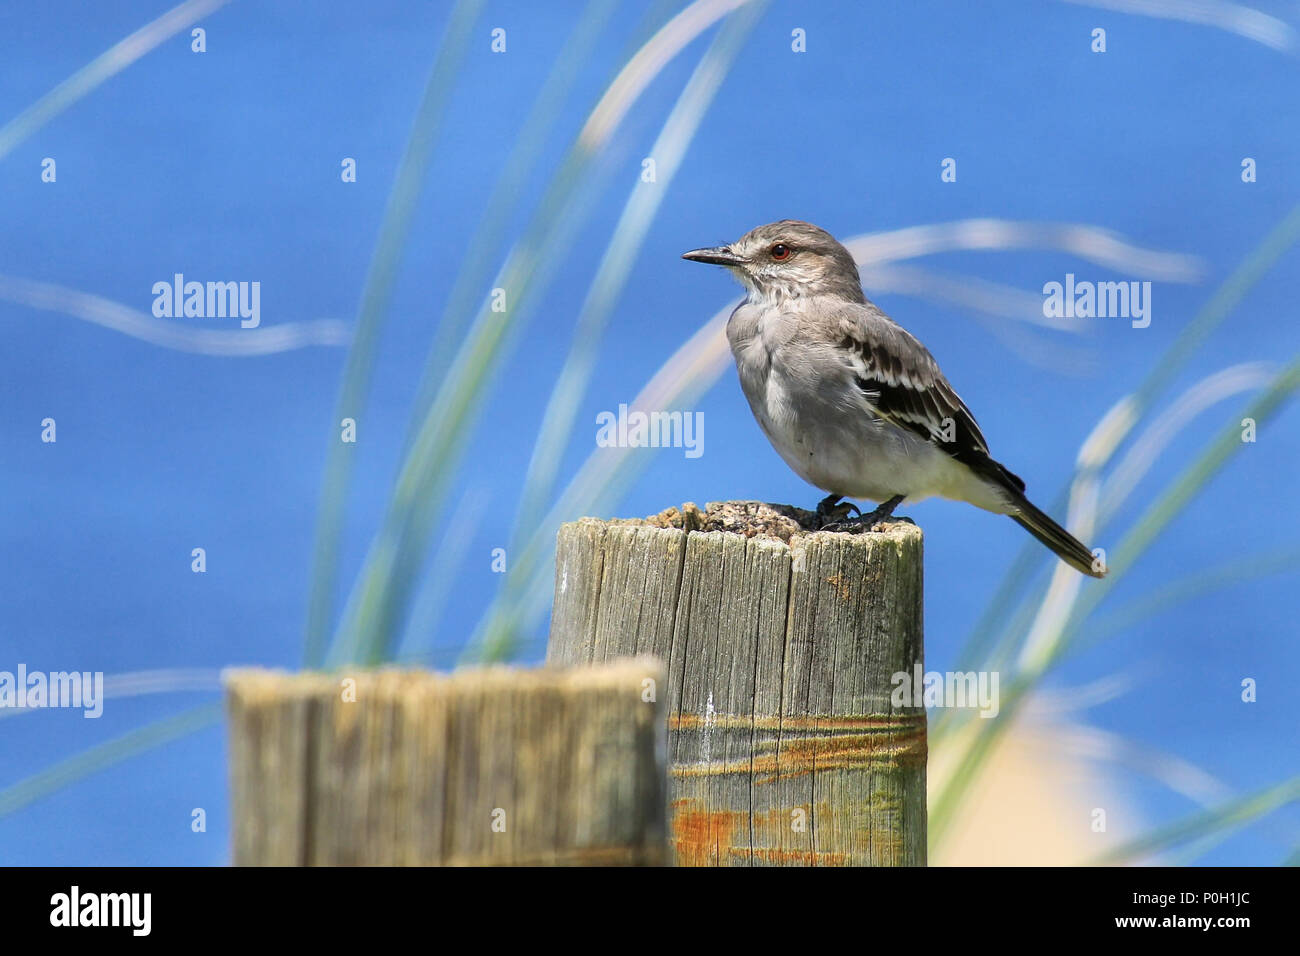 Fuscous flycatcher (Cnemotriccus fuscatus) sitting on a wooden pole in Montevideo, Uruguay Stock Photo